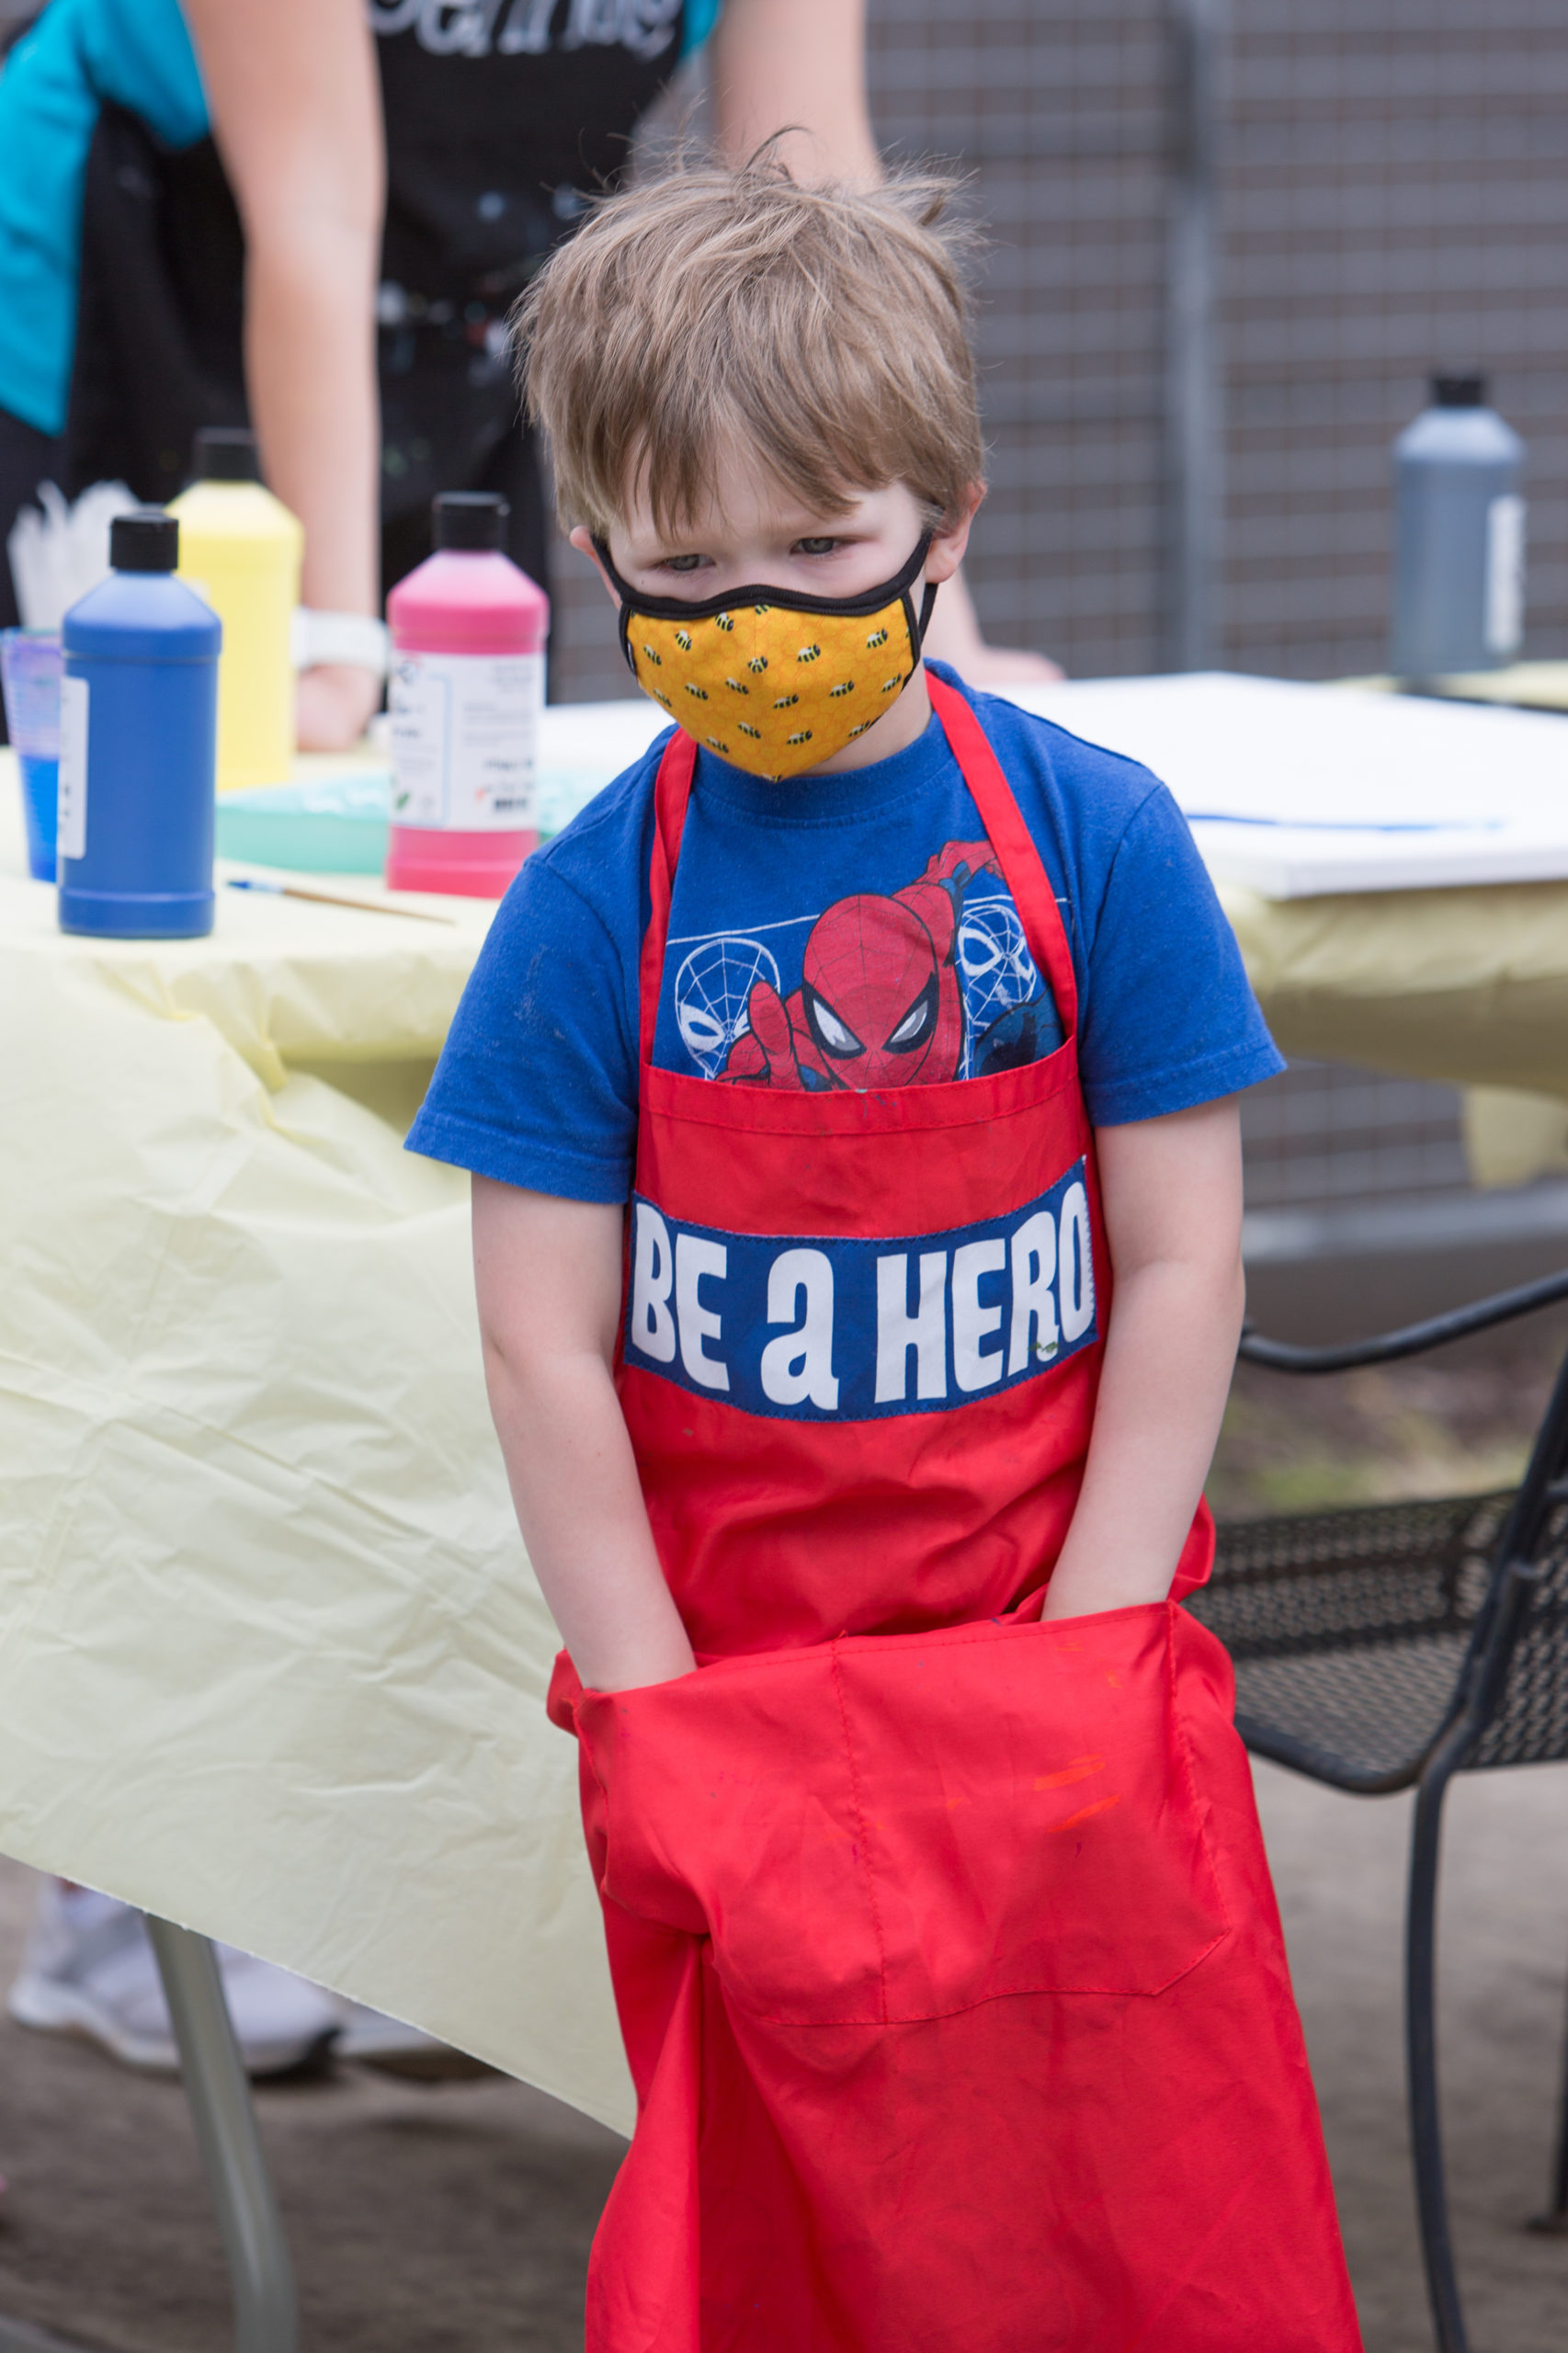 A boy is wearing a face mask an apron saying Be A Hero and a spiderman t-shirt